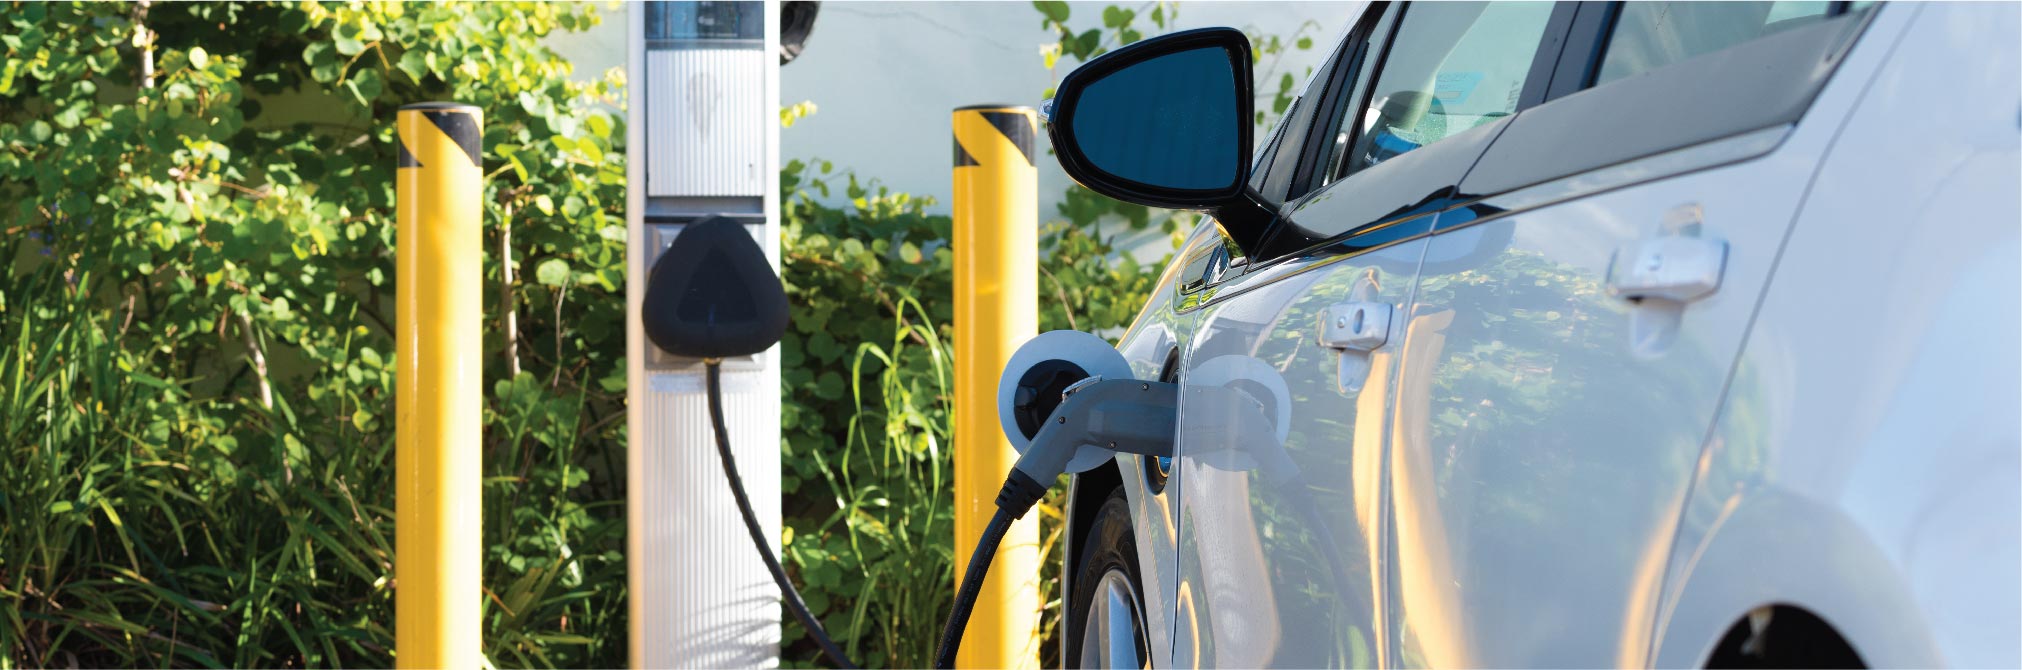 An electric car charger plugged into an electric vehicle